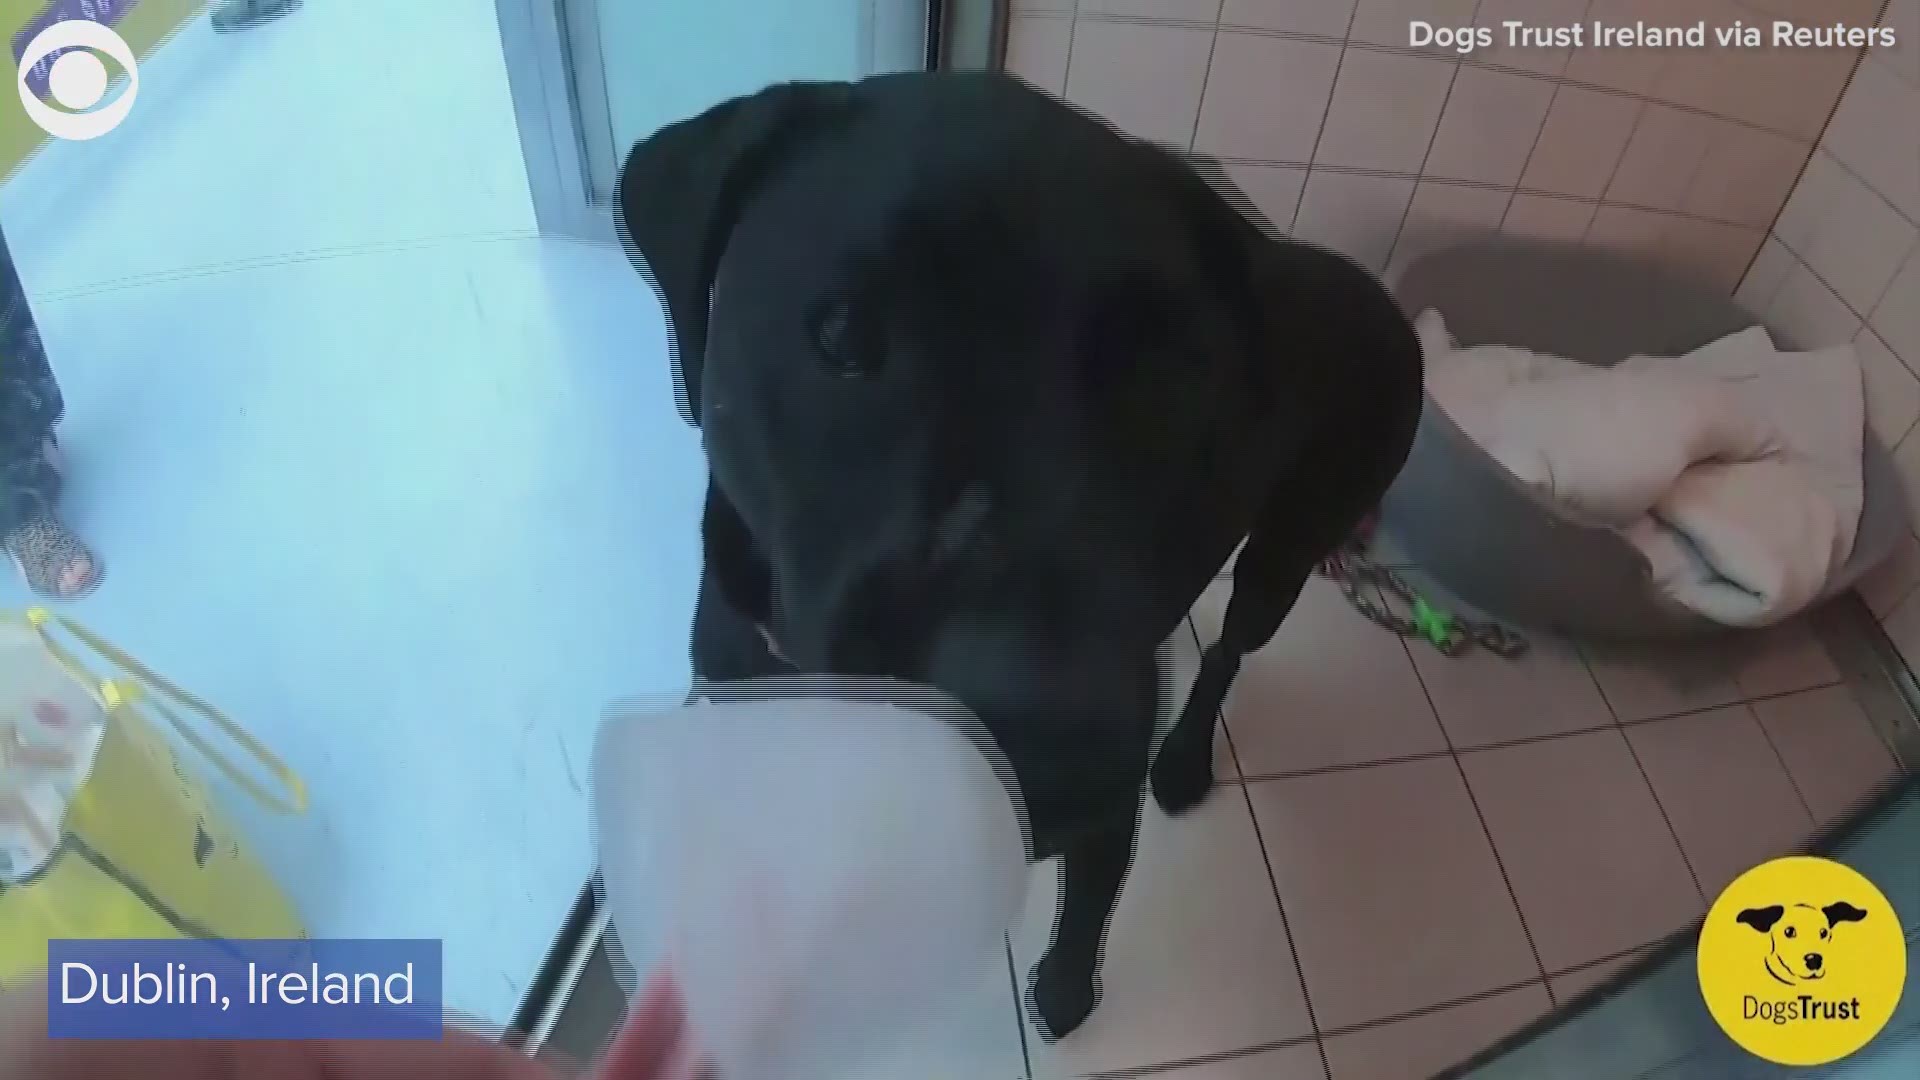 A dog shelter in Ireland treated their pooches to some frozen treats on a hot day.